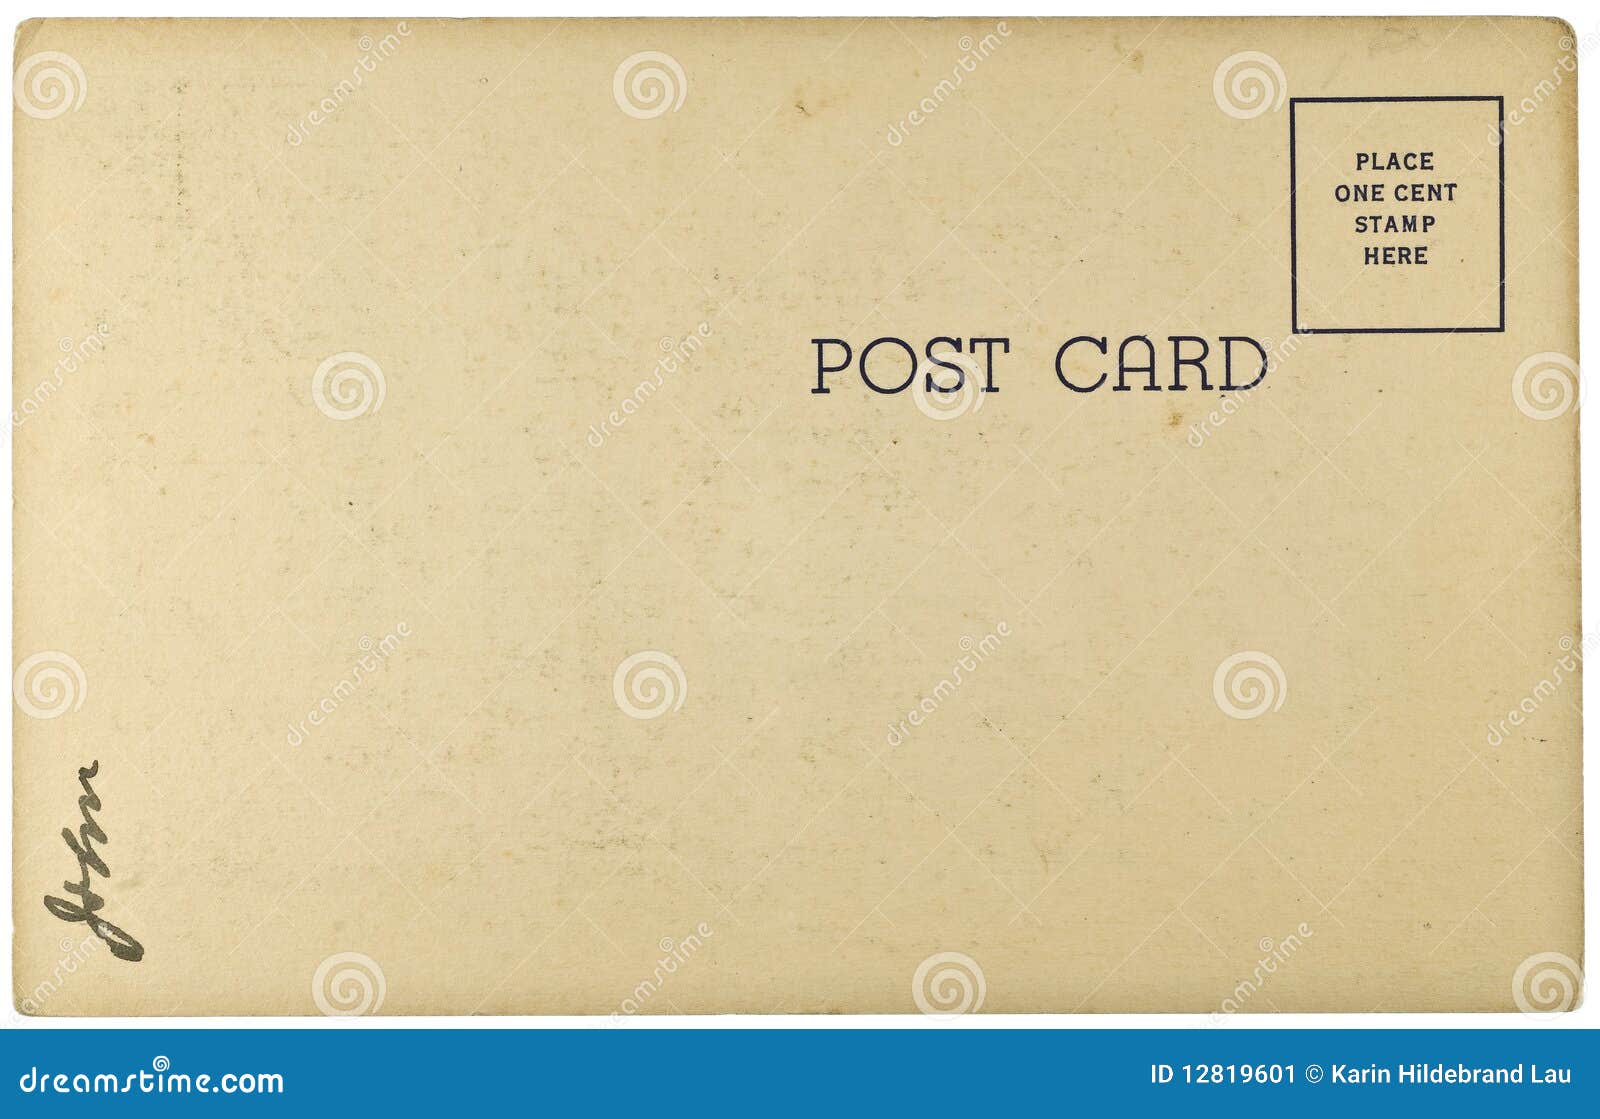 179,521 Blank Vintage Postcard Royalty-Free Images, Stock Photos & Pictures